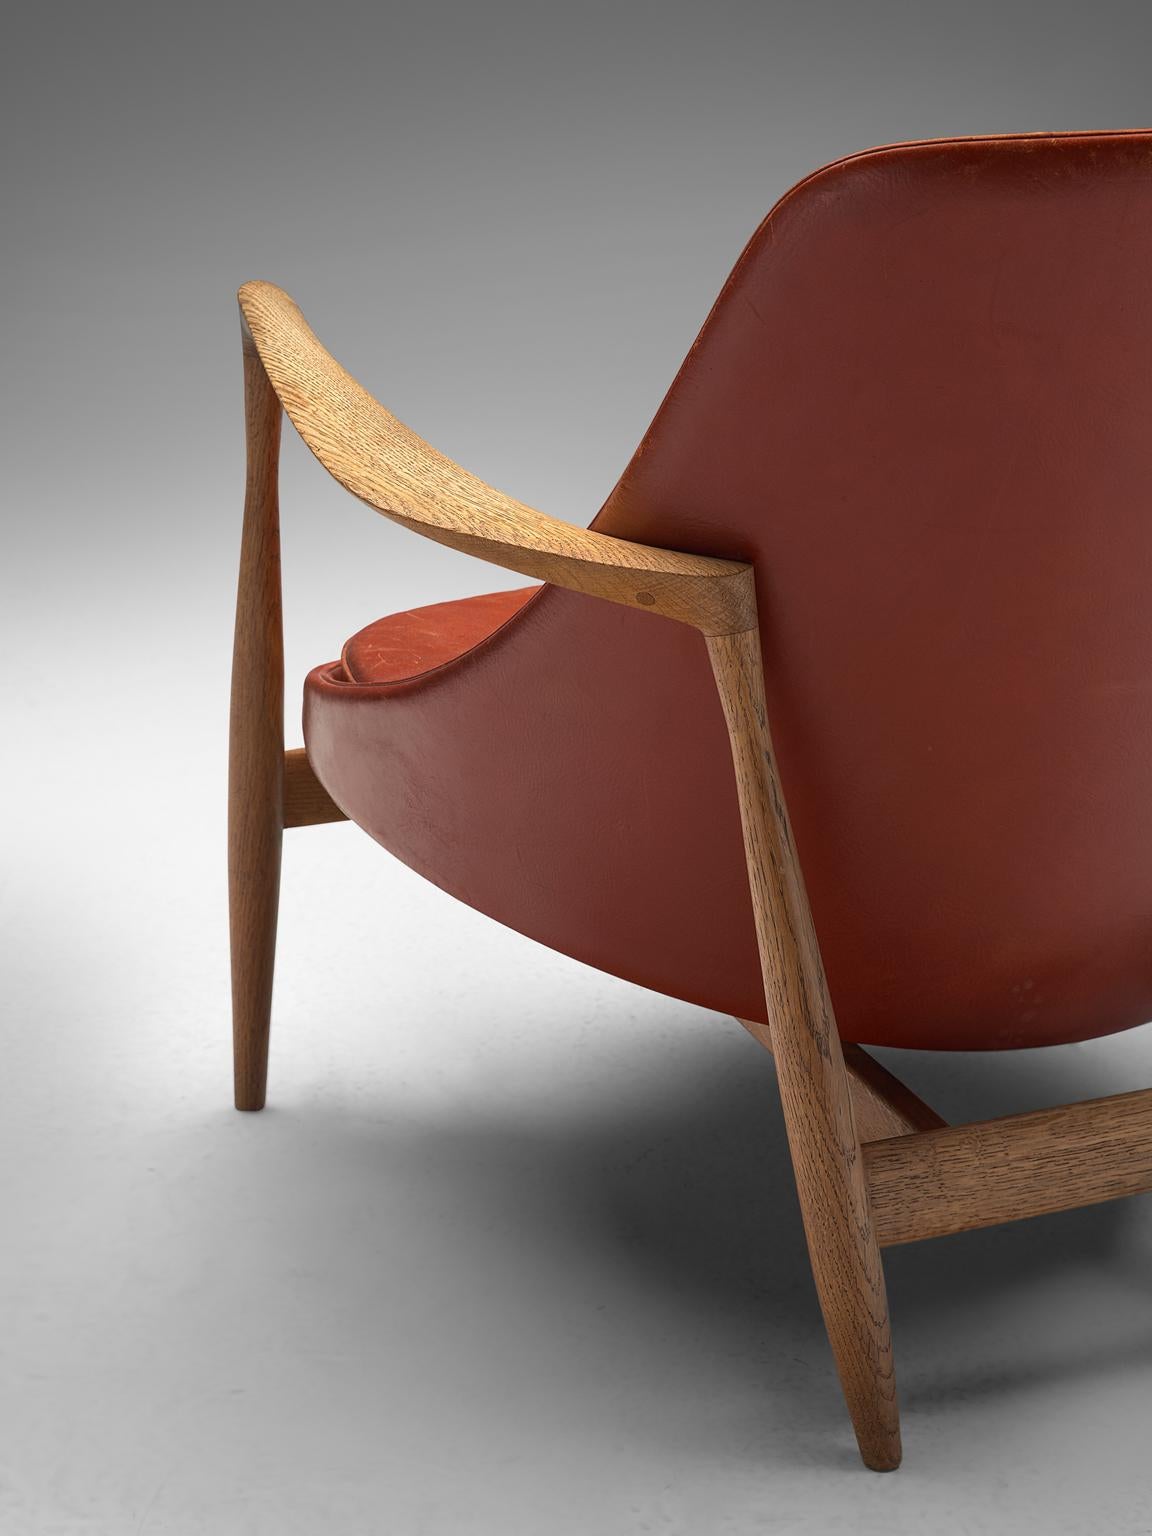 Ib Kofod-Larsen 'Elizabeth' Chairs with Ottoman in Original Aged Leather 1